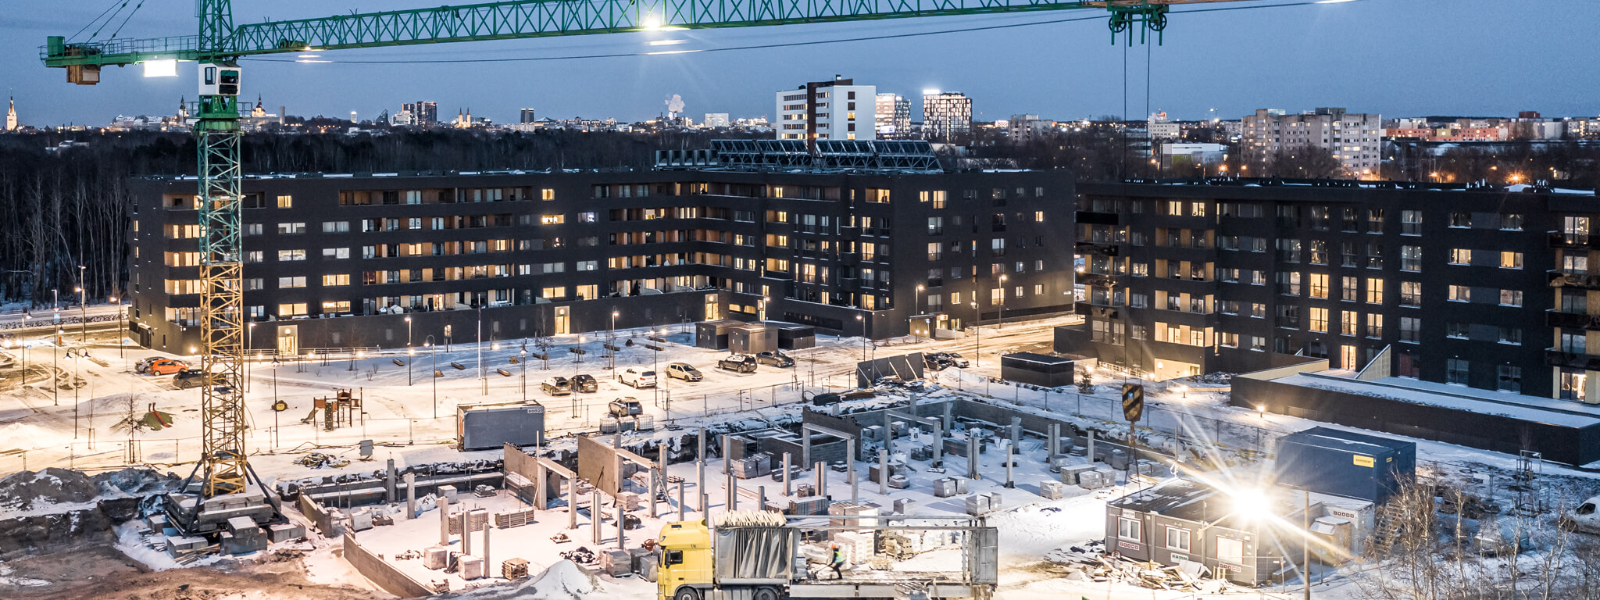 Construction of residential and non-residential buildings in Tallinn